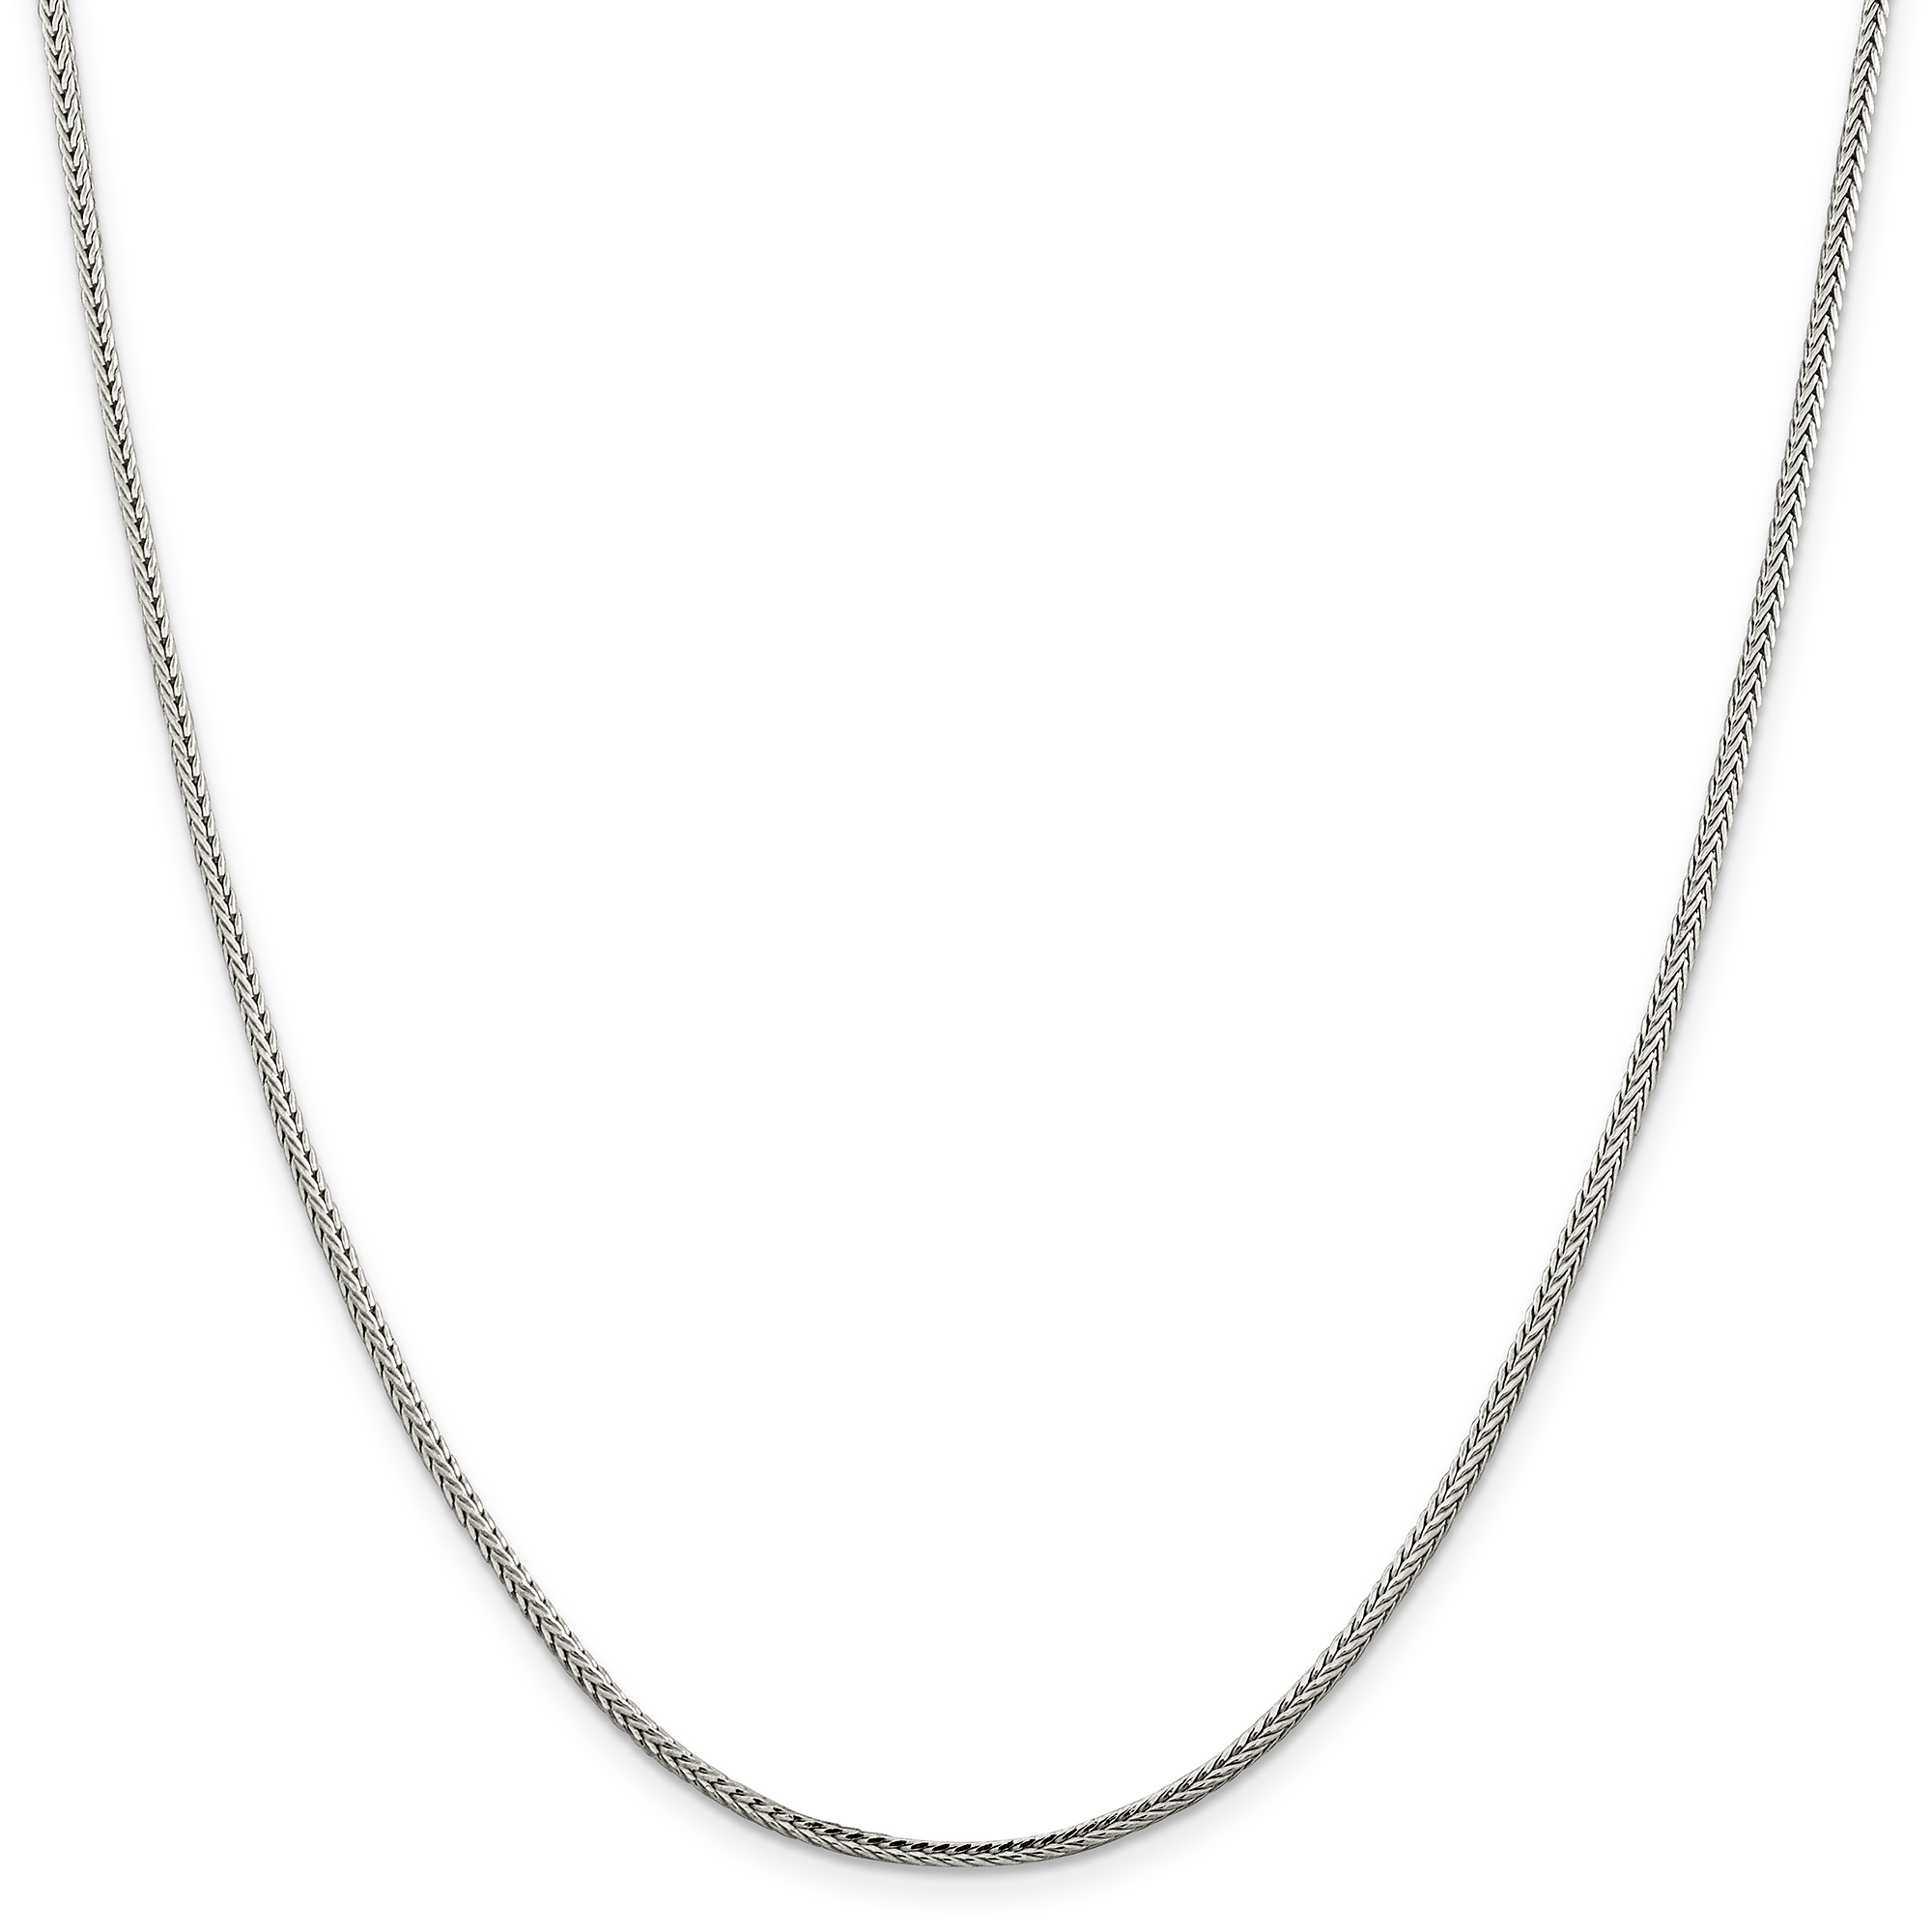 Handmade Sterling Silver Circle Necklace  Round Silver Necklace  Diamond Cut Chain Included